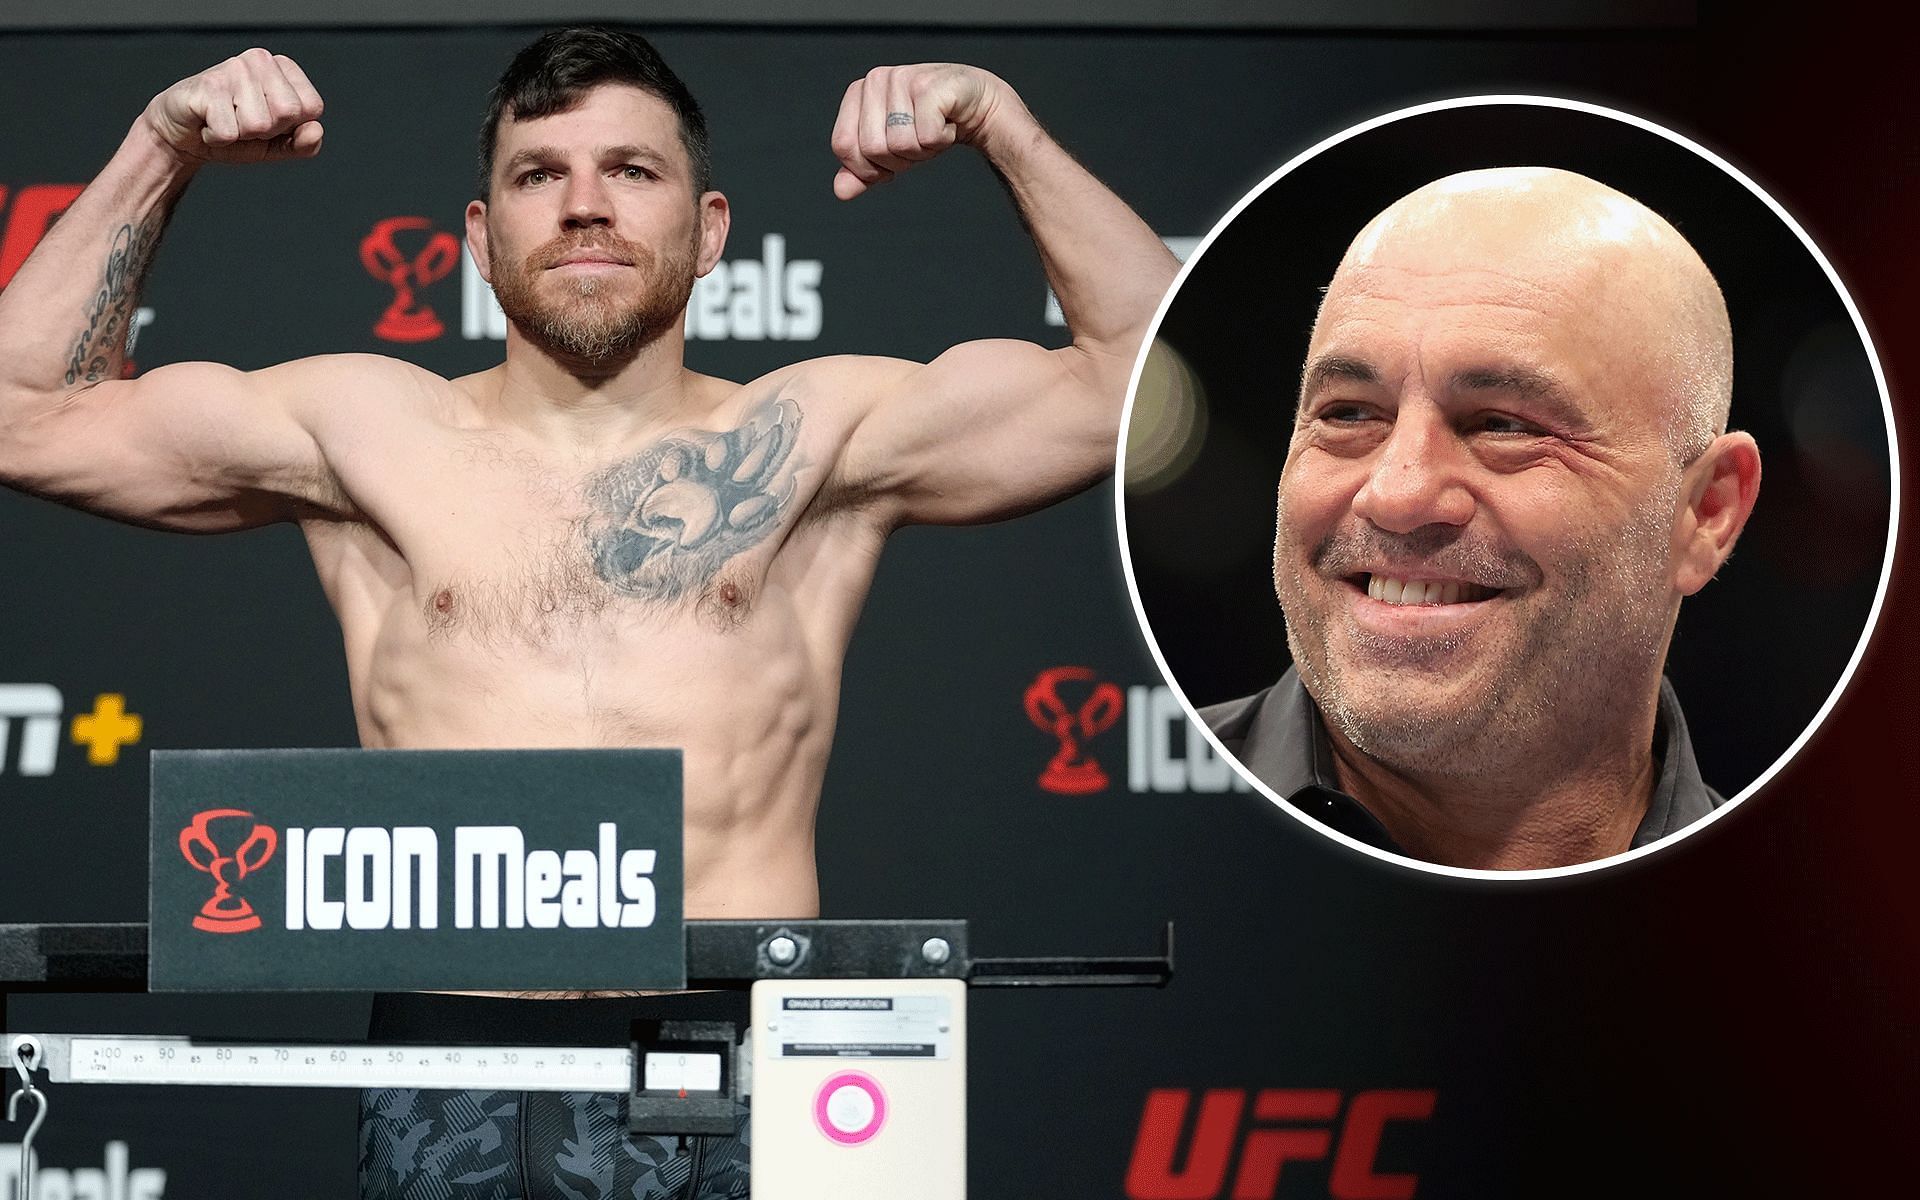 Jim Miller (left) was showered with plaudits by MMA personality and UFC commentator Joe Rogan for intentionally missing weight heading into a historic UFC event [Images courtesy: Getty Images]